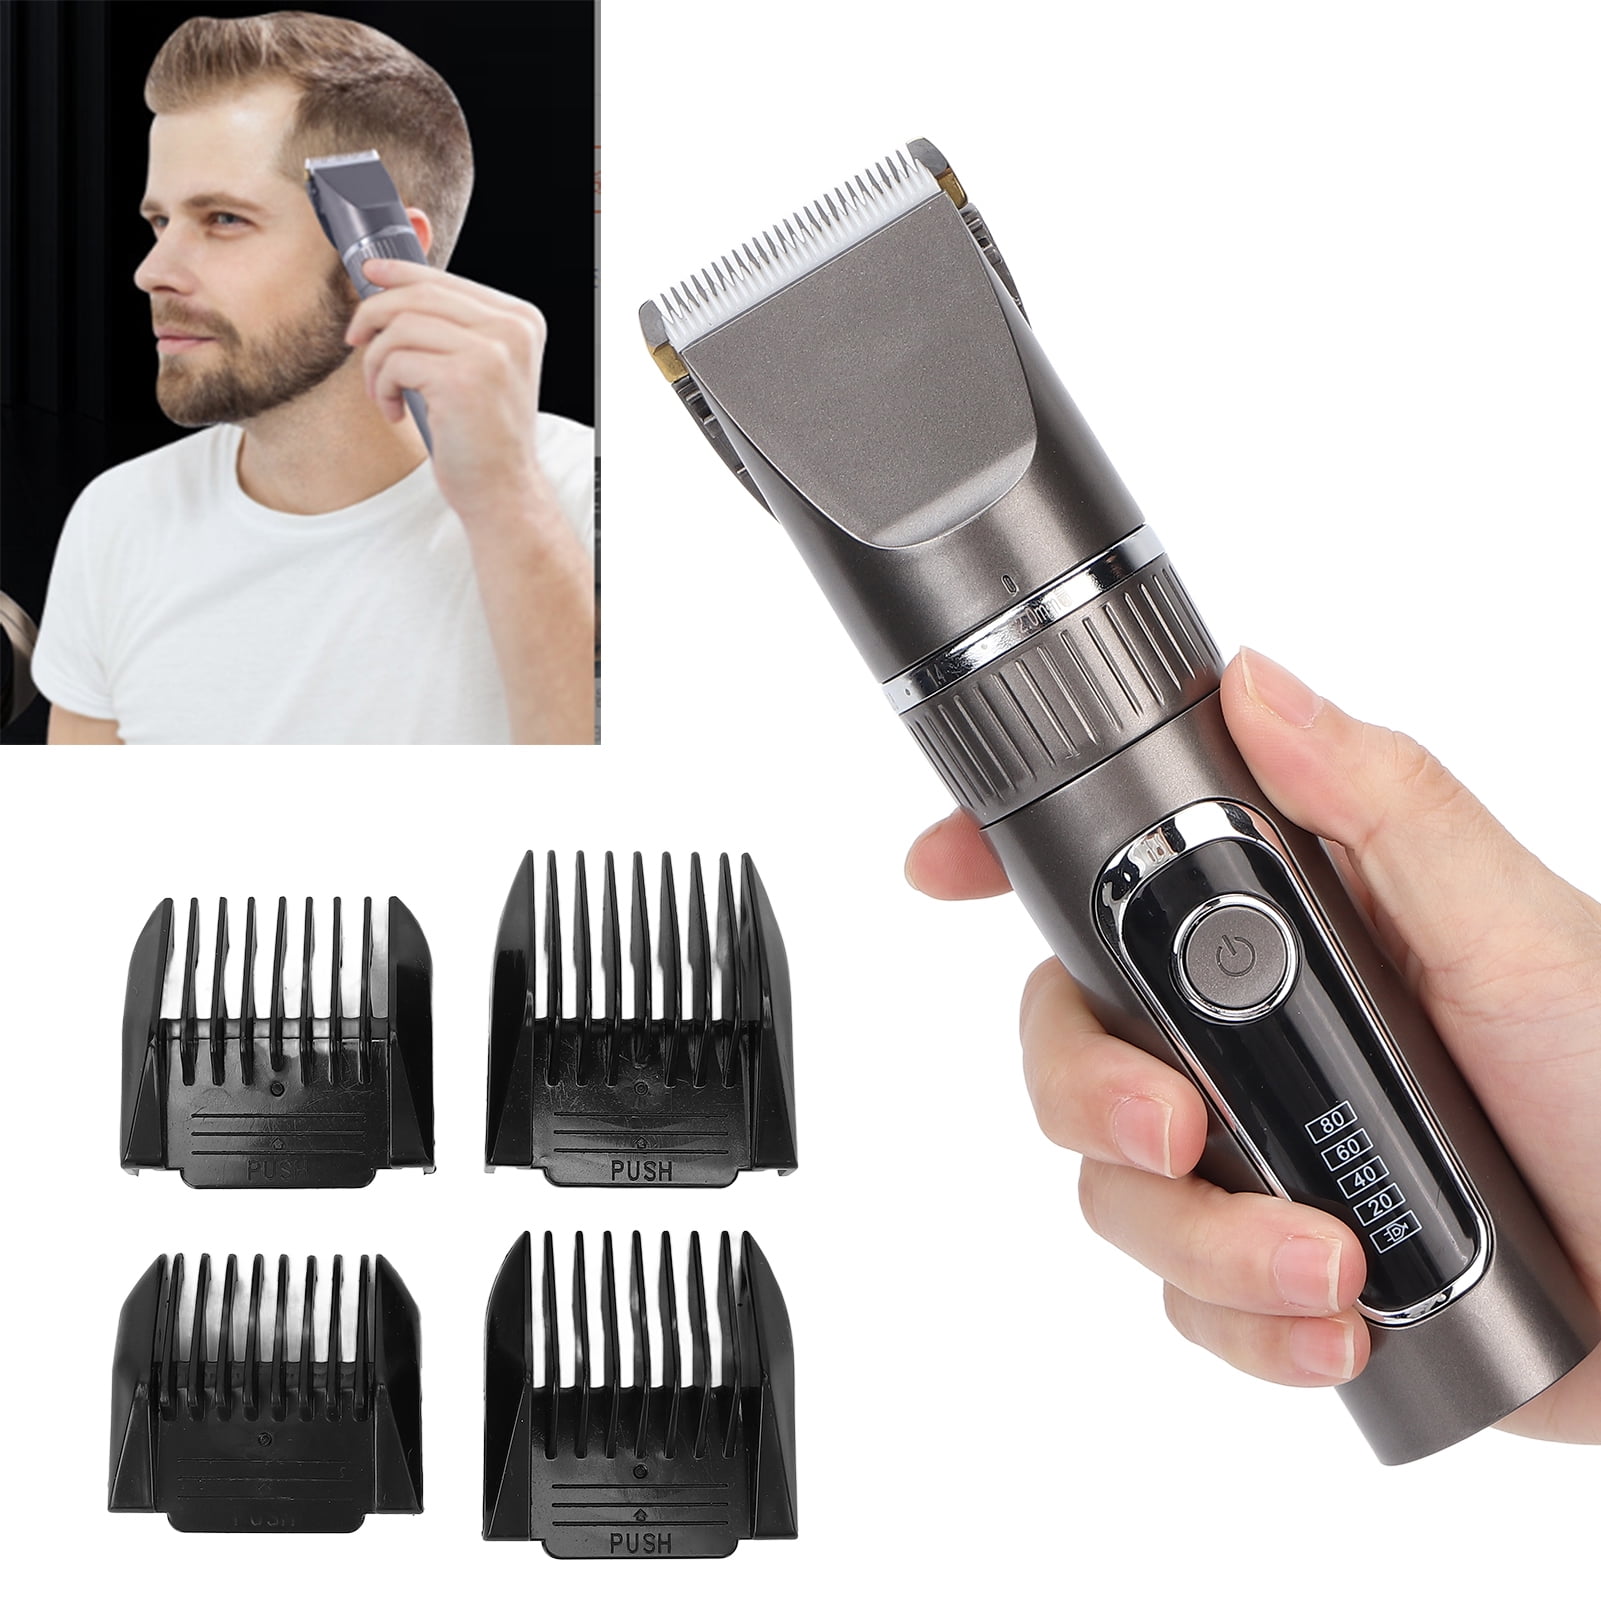 Ymiko Cordless Hair Trimmer,Men Electric Hair Trimmer Clippers Professional  Ceramic Blade Haircutting Kit With 4 Guide Combs For Home Use,Electric Hair  Clipper - Walmart.com